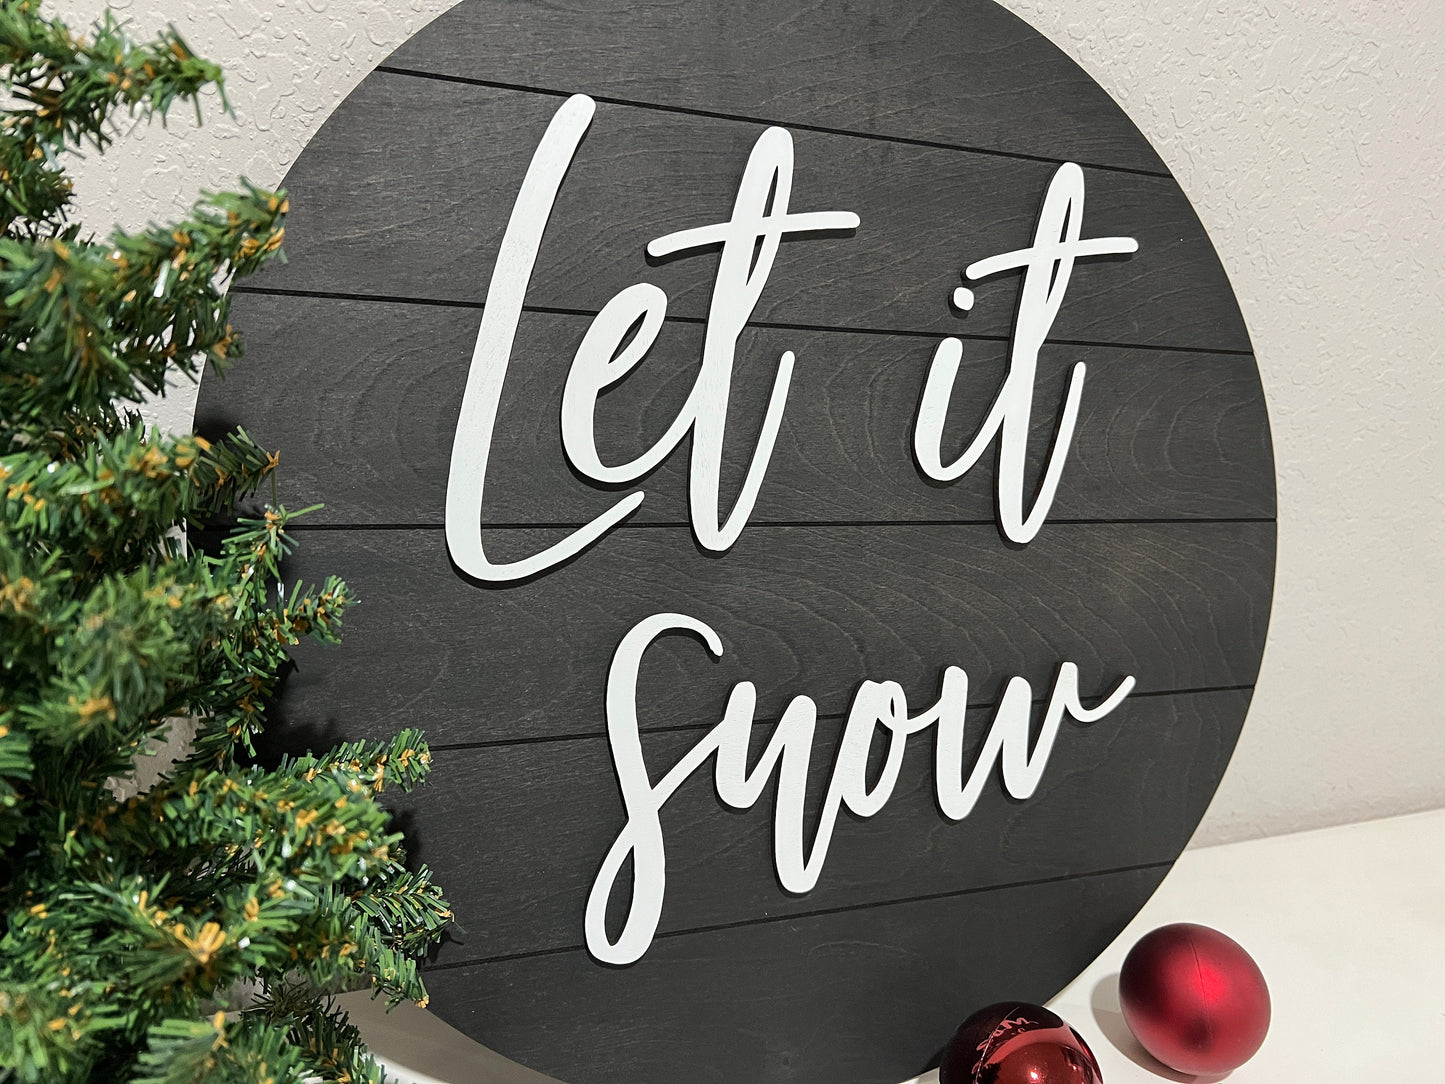 Let it snow sign, Christmas decorations, 3D holiday decor, shiplap wood signs, living room wooden sign wall hanging, black mantel decor